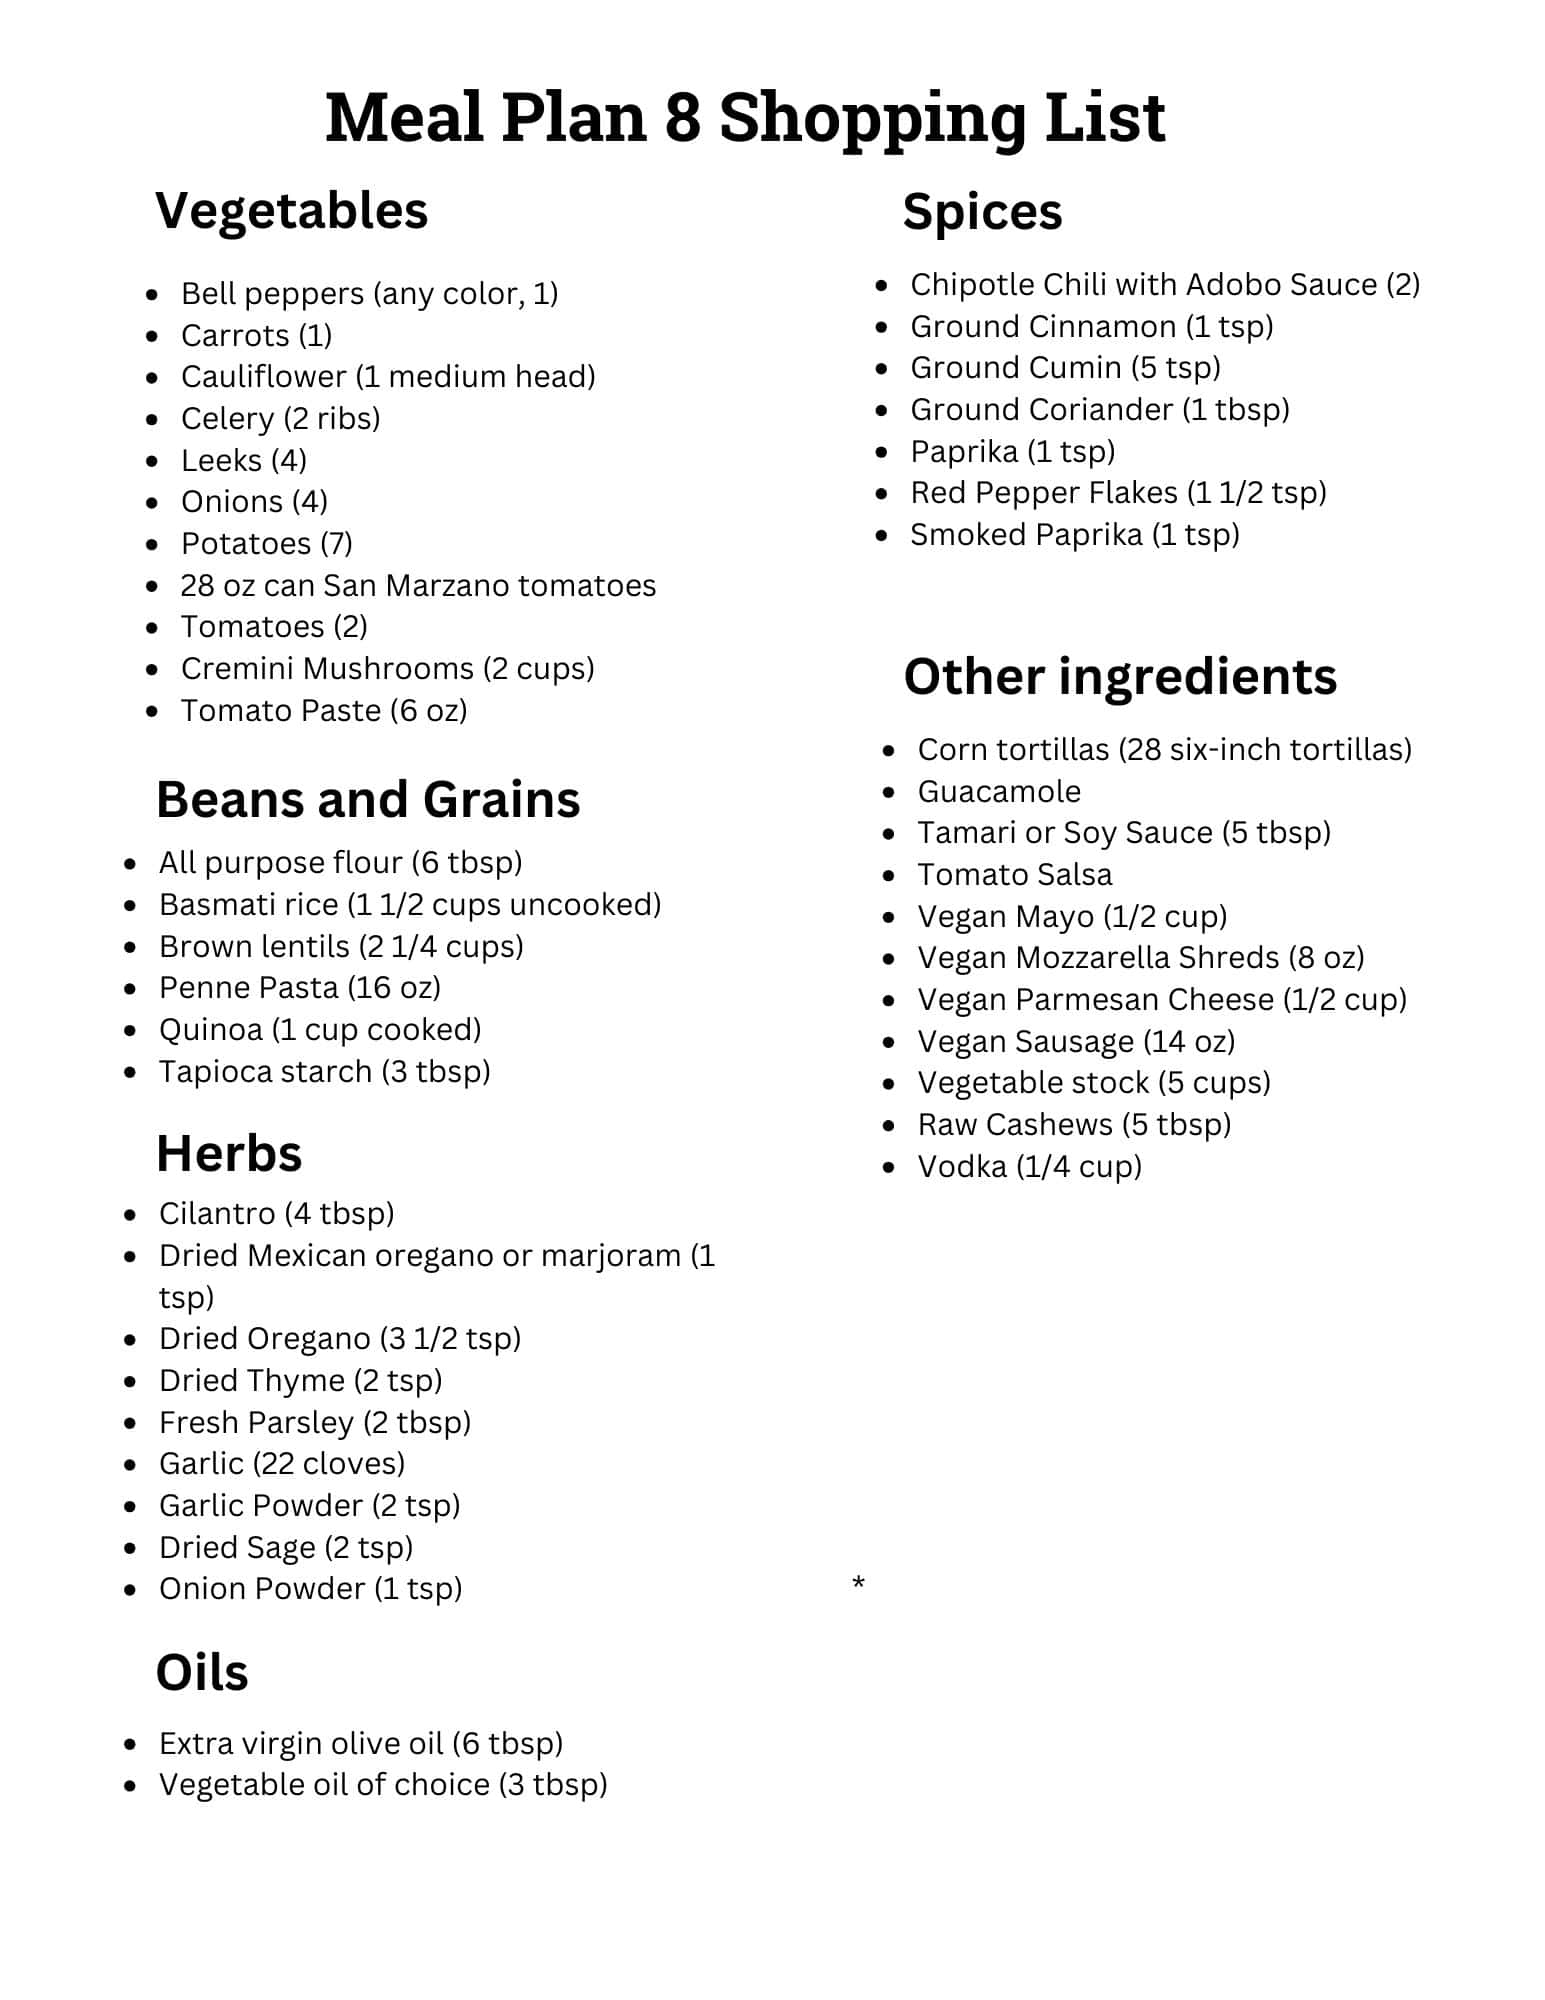 Image of shopping list for vegan meal plan 8 with list of ingredients.